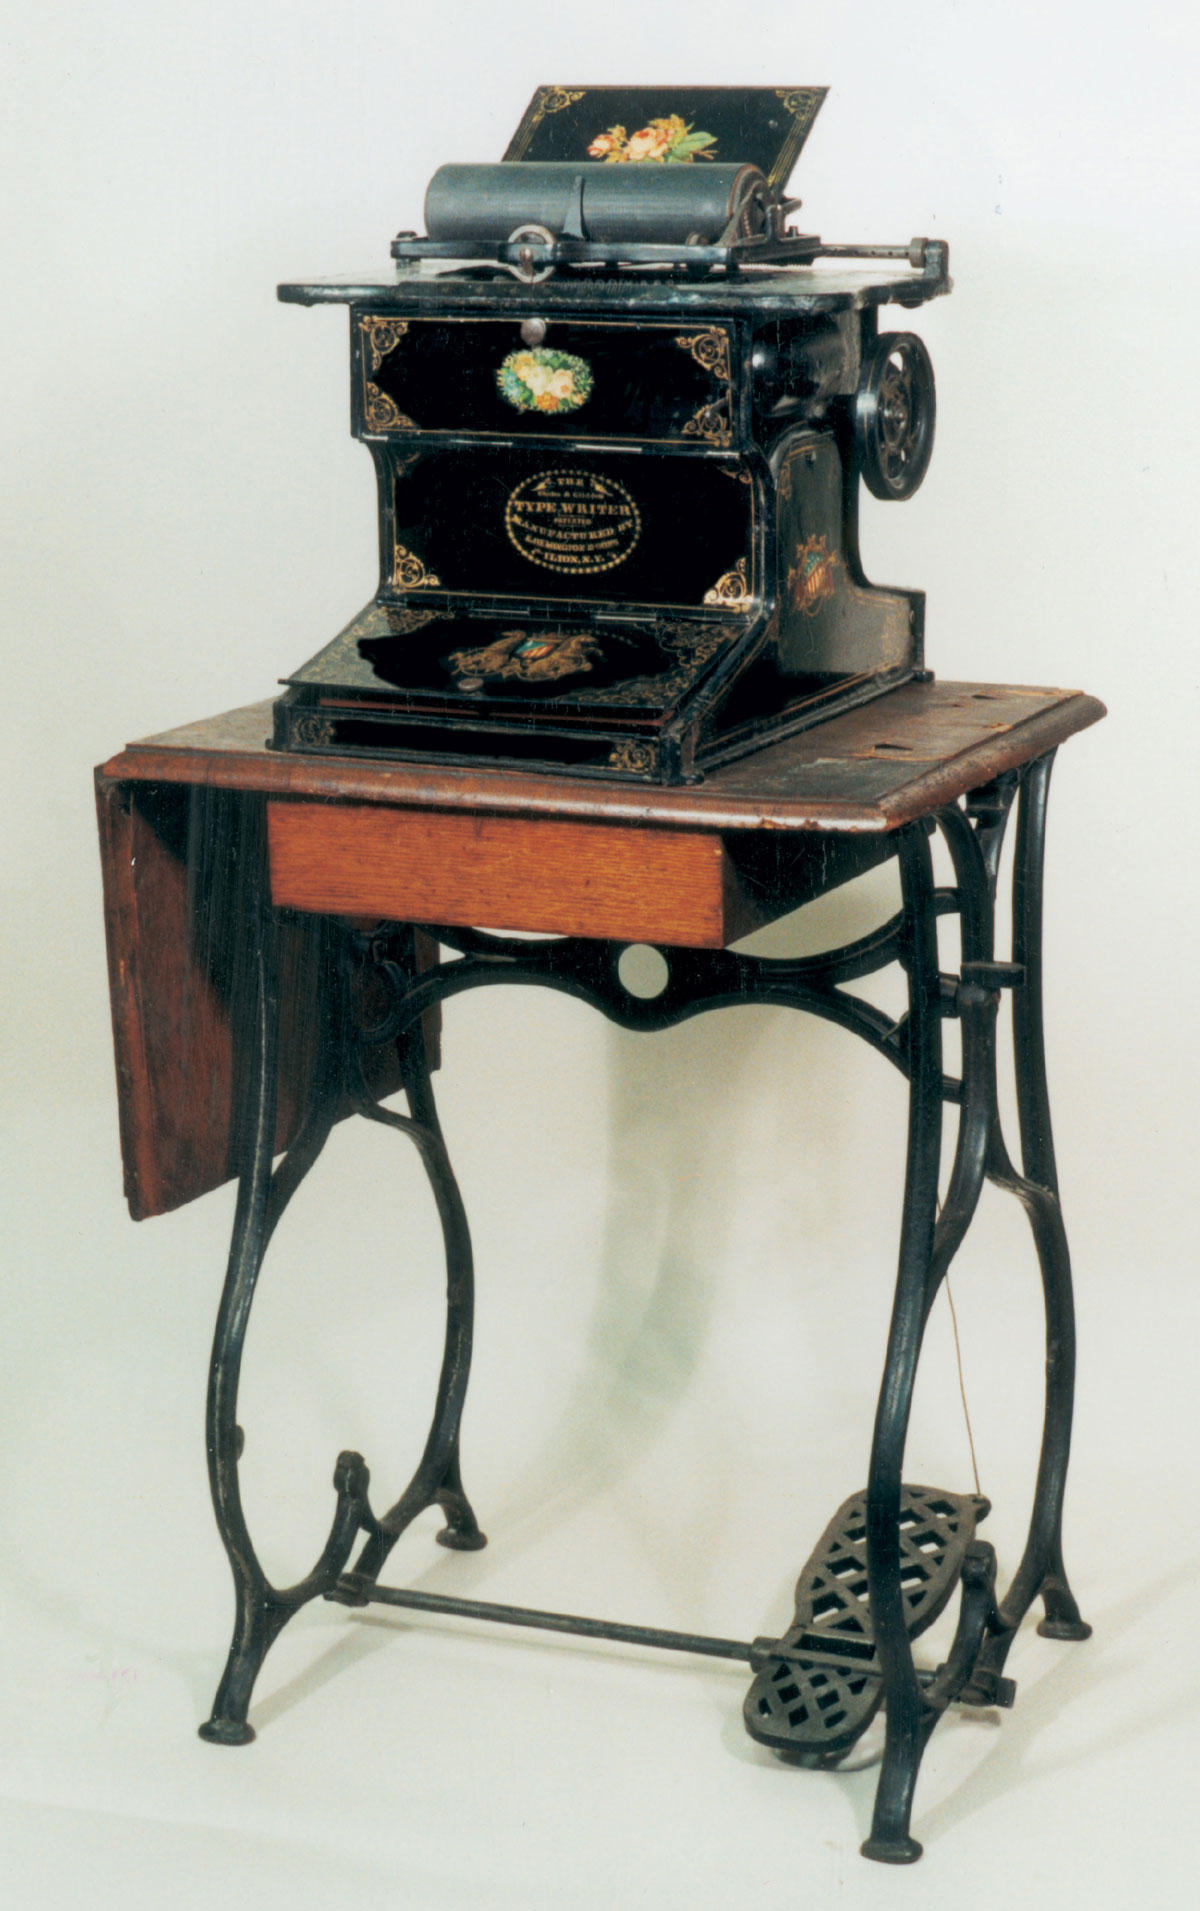 A photograph of a Sholes & Glidden typewriter from the 1870s, the model used by Mark Twain. 